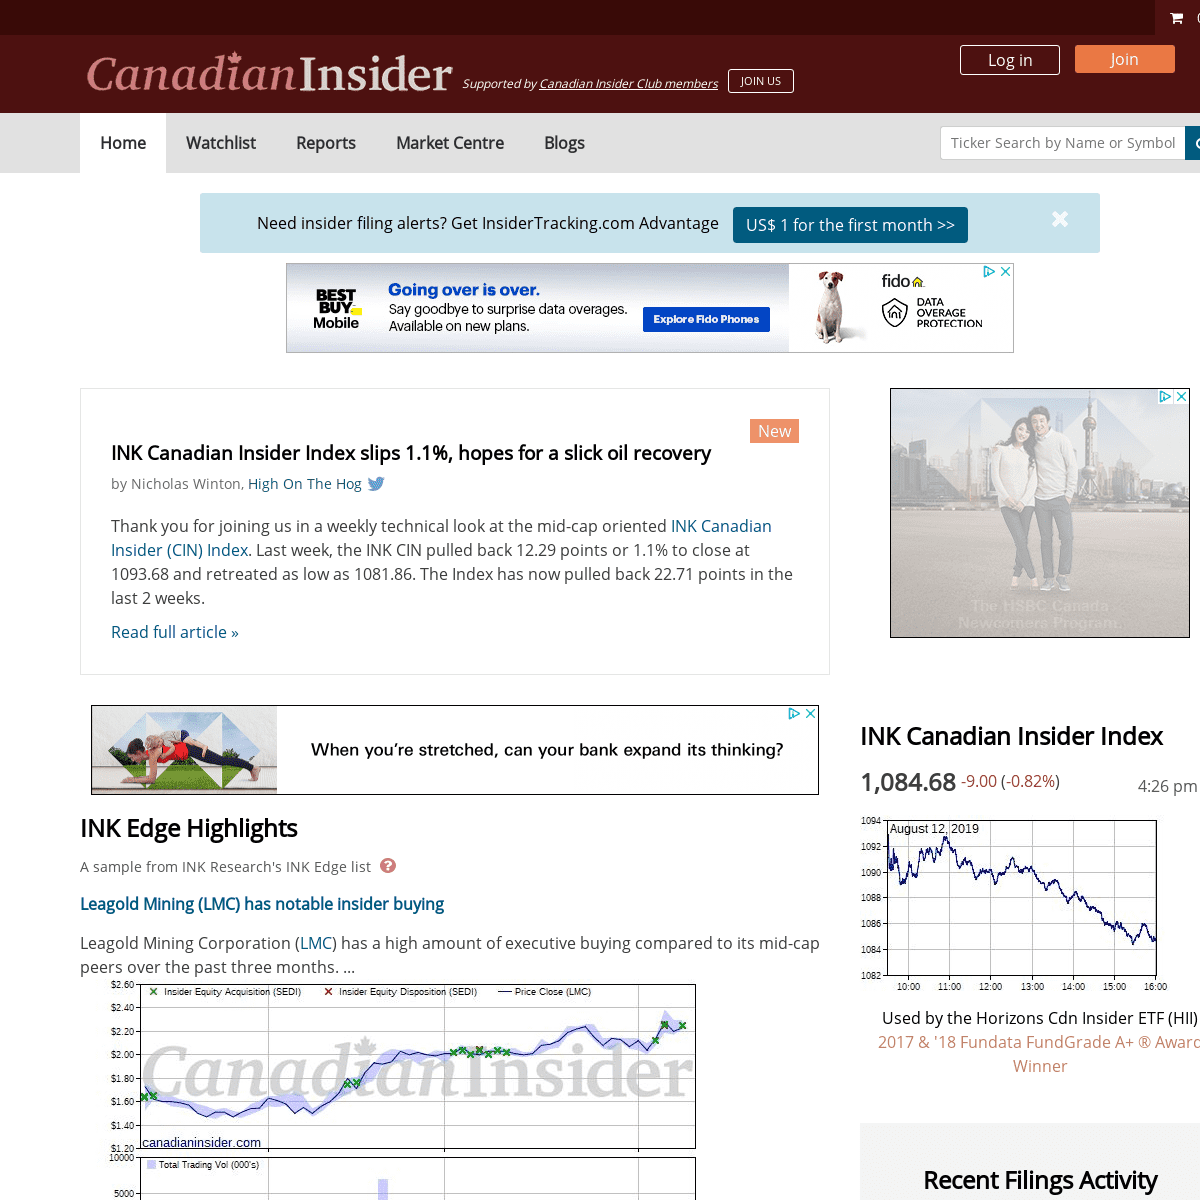 Canadian Insider | Insider Filings, News and Alerts on the Canadian Stock Market